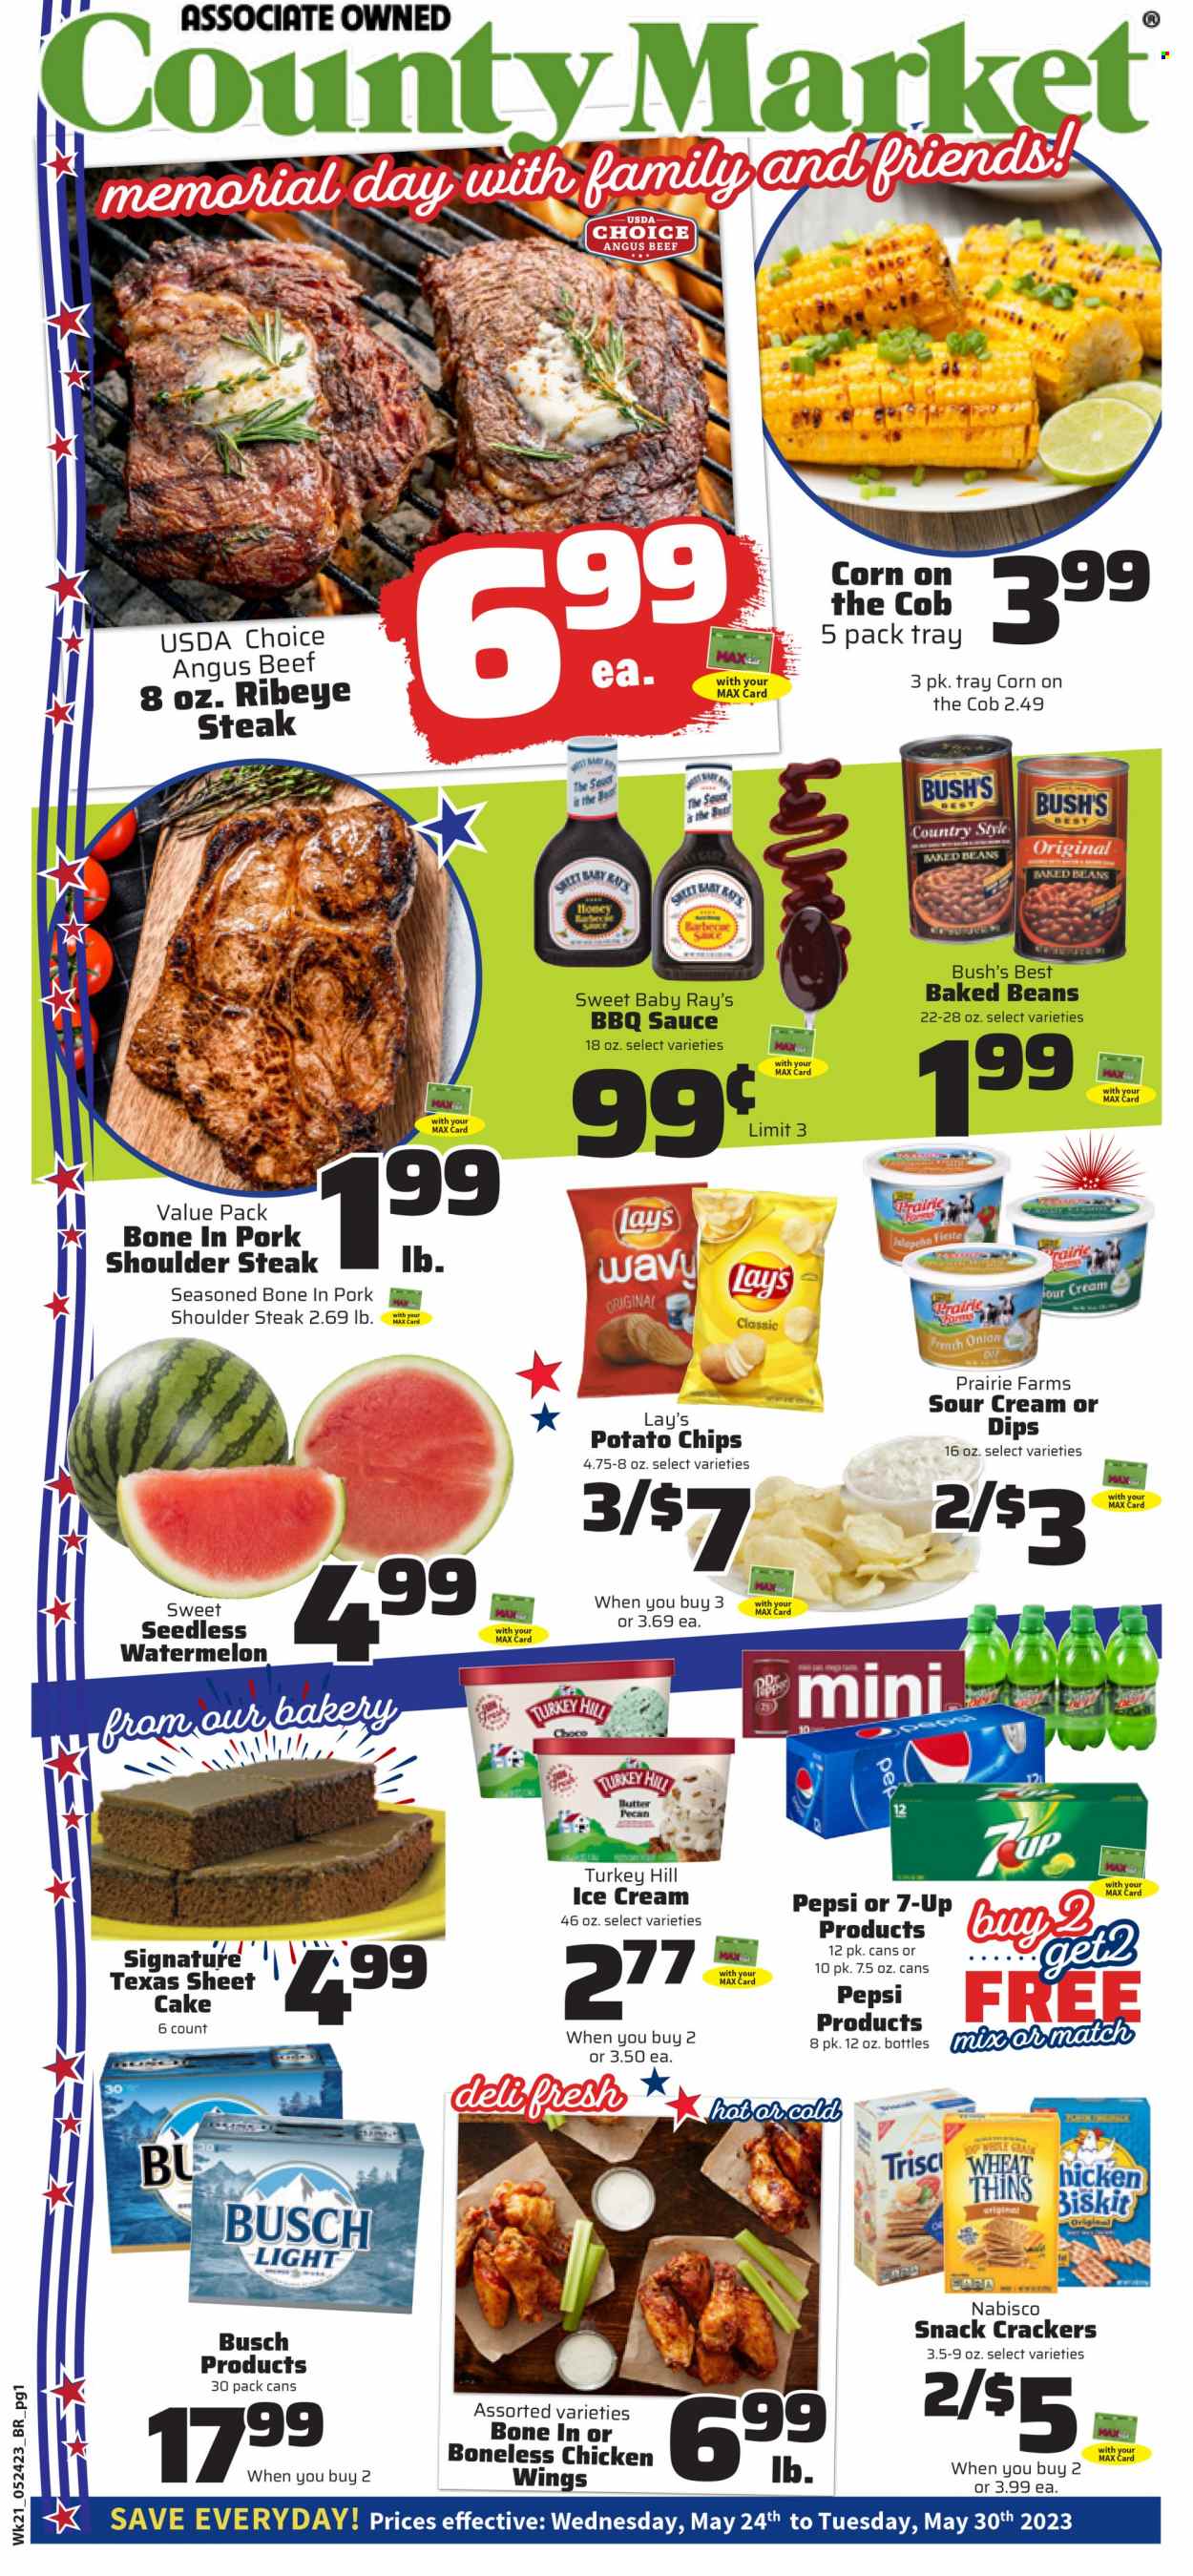 thumbnail - County Market Flyer - 05/24/2023 - 05/30/2023 - Sales products - cake, beans, corn, watermelon, sauce, ready meal, sour cream, ice cream, chicken wings, snack, crackers, Nabisco, potato chips, chips, Lay’s, Thins, baked beans, BBQ sauce, honey, Pepsi, soft drink, 7UP, beer, Busch, chicken, turkey, beef meat, beef steak, steak, ribeye steak, pork meat, pork shoulder. Page 1.